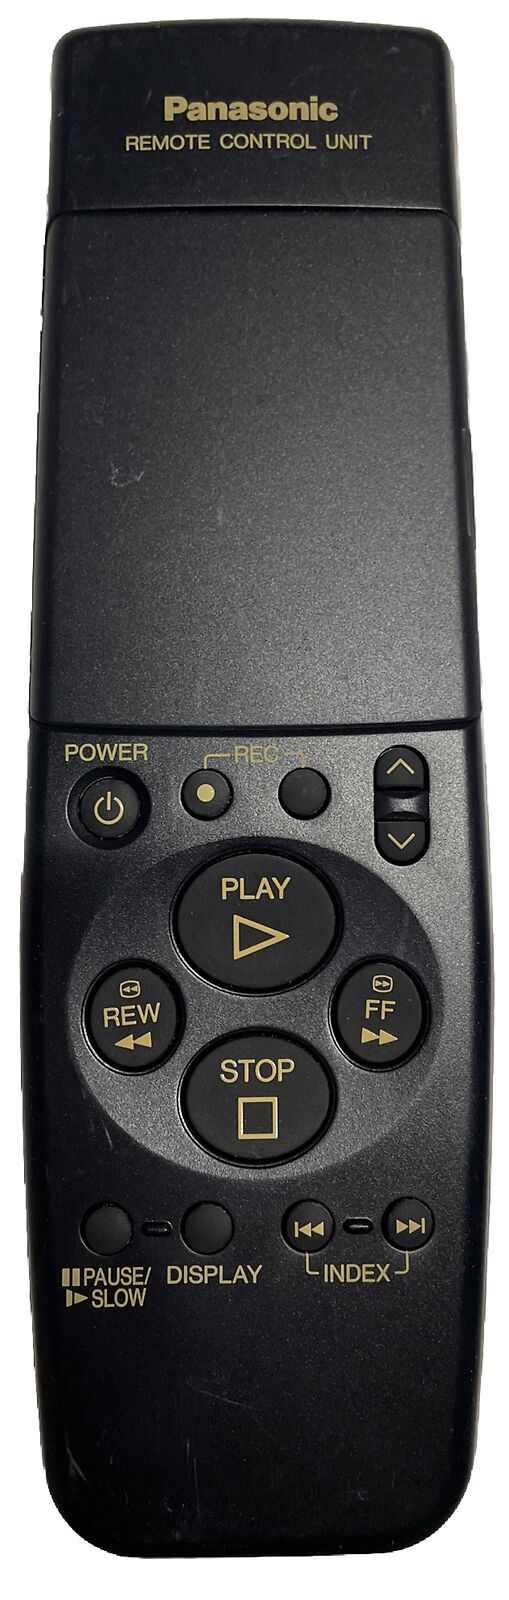 Panasonic VEQ1642 Remote Control for VCR AG-1300P and More-Remote Controls-SpenCertified-vintage-refurbished-electronics